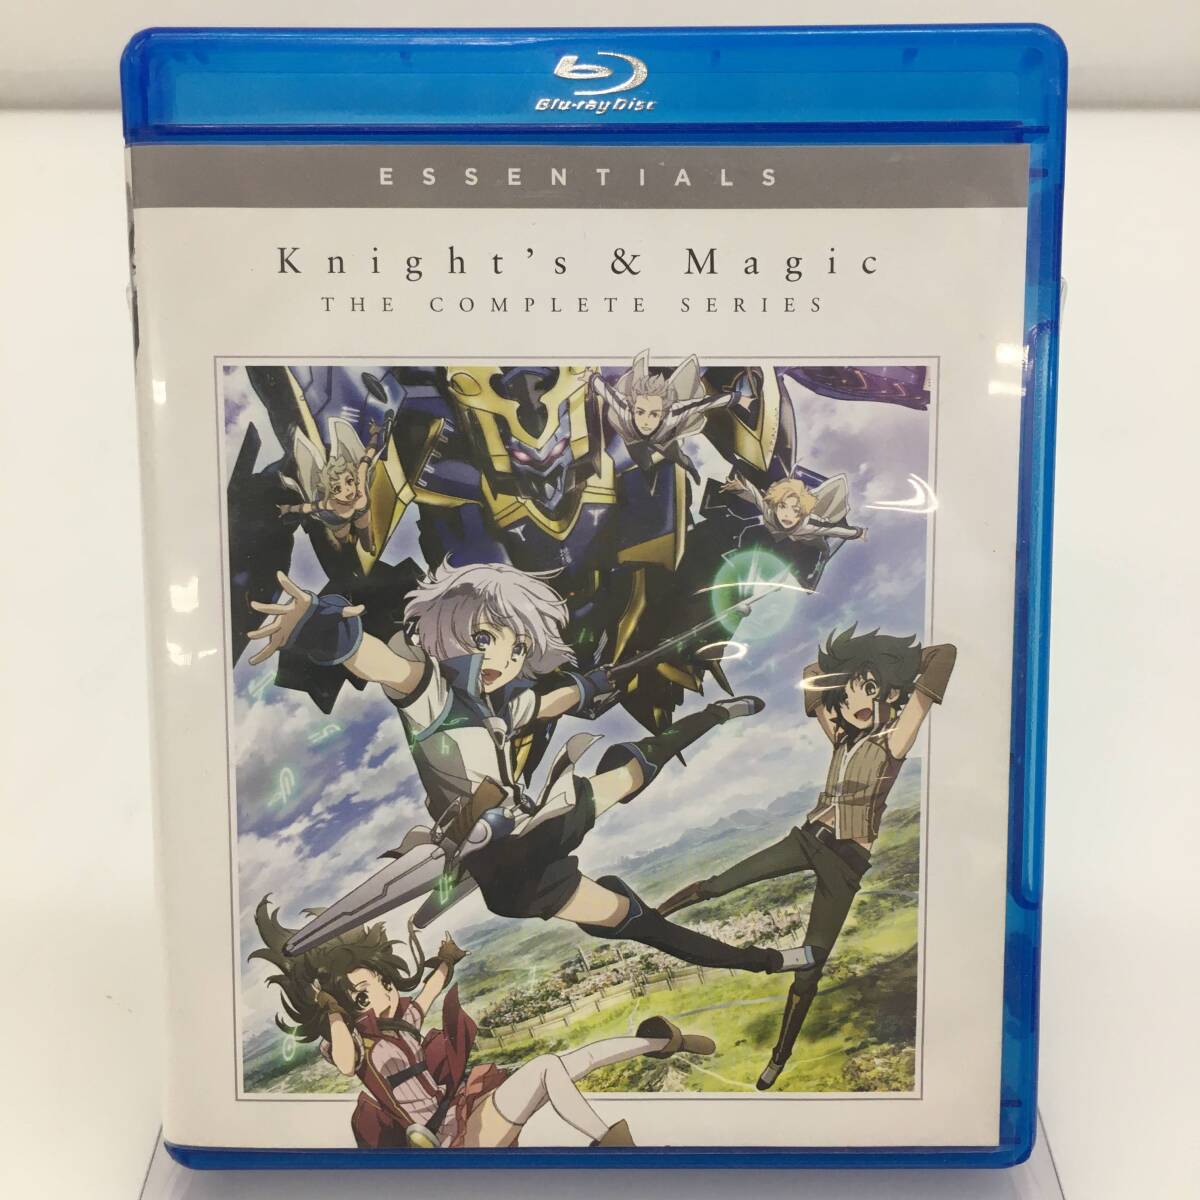 C5208 ★1円～【Blu-ray Disc】 Knight's ＆ Magic THE COMPLETE SERIES 中古品 ◎コンパクト発送◎の画像1